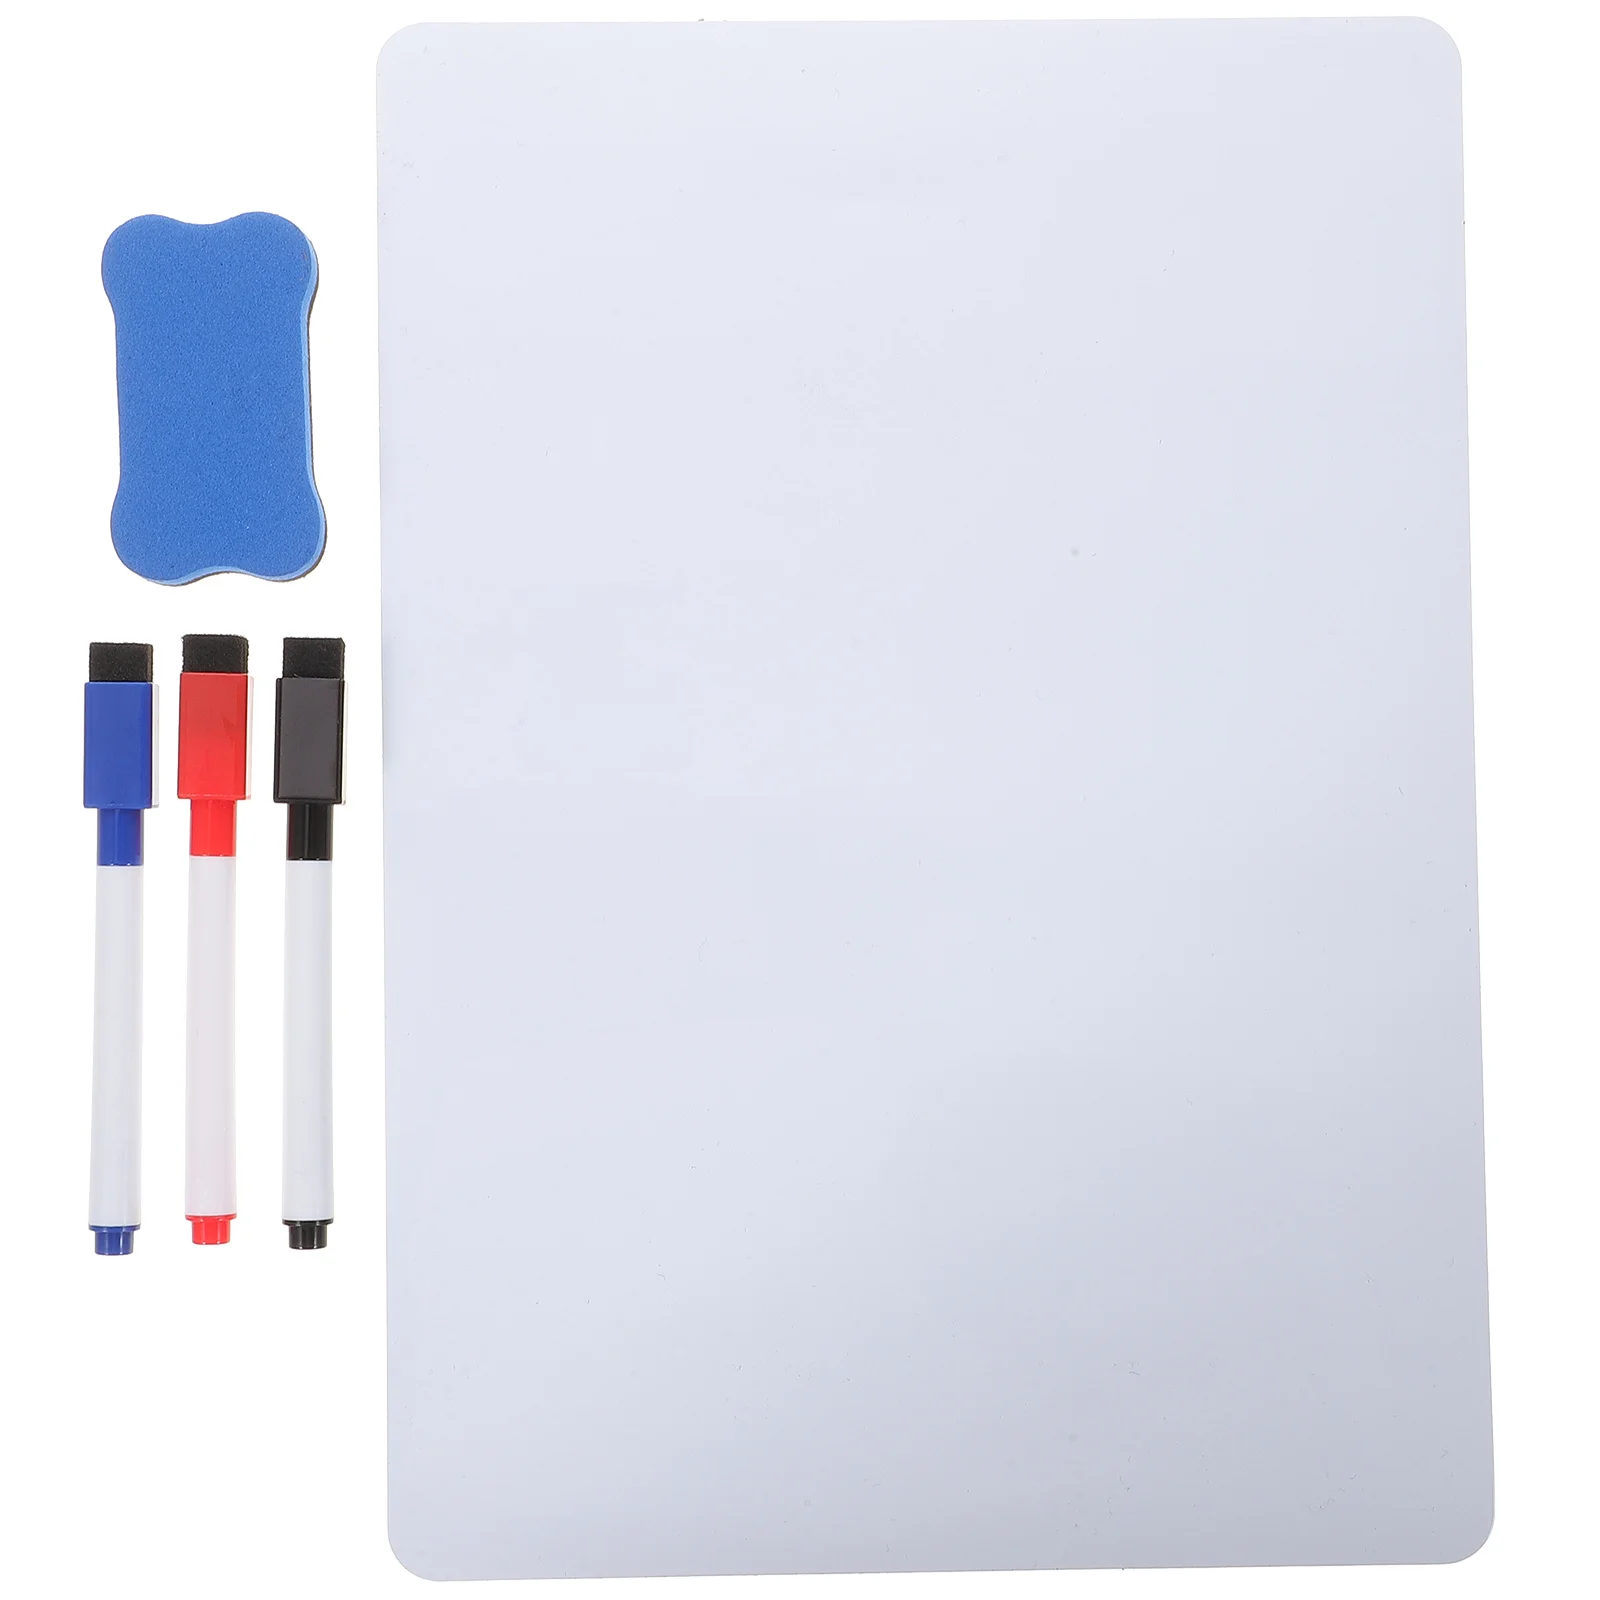 

Soft Whiteboard Fridge Memo Pad Self Adhesive Notes Hanging Refrigerator Post-note Blank Message Portable